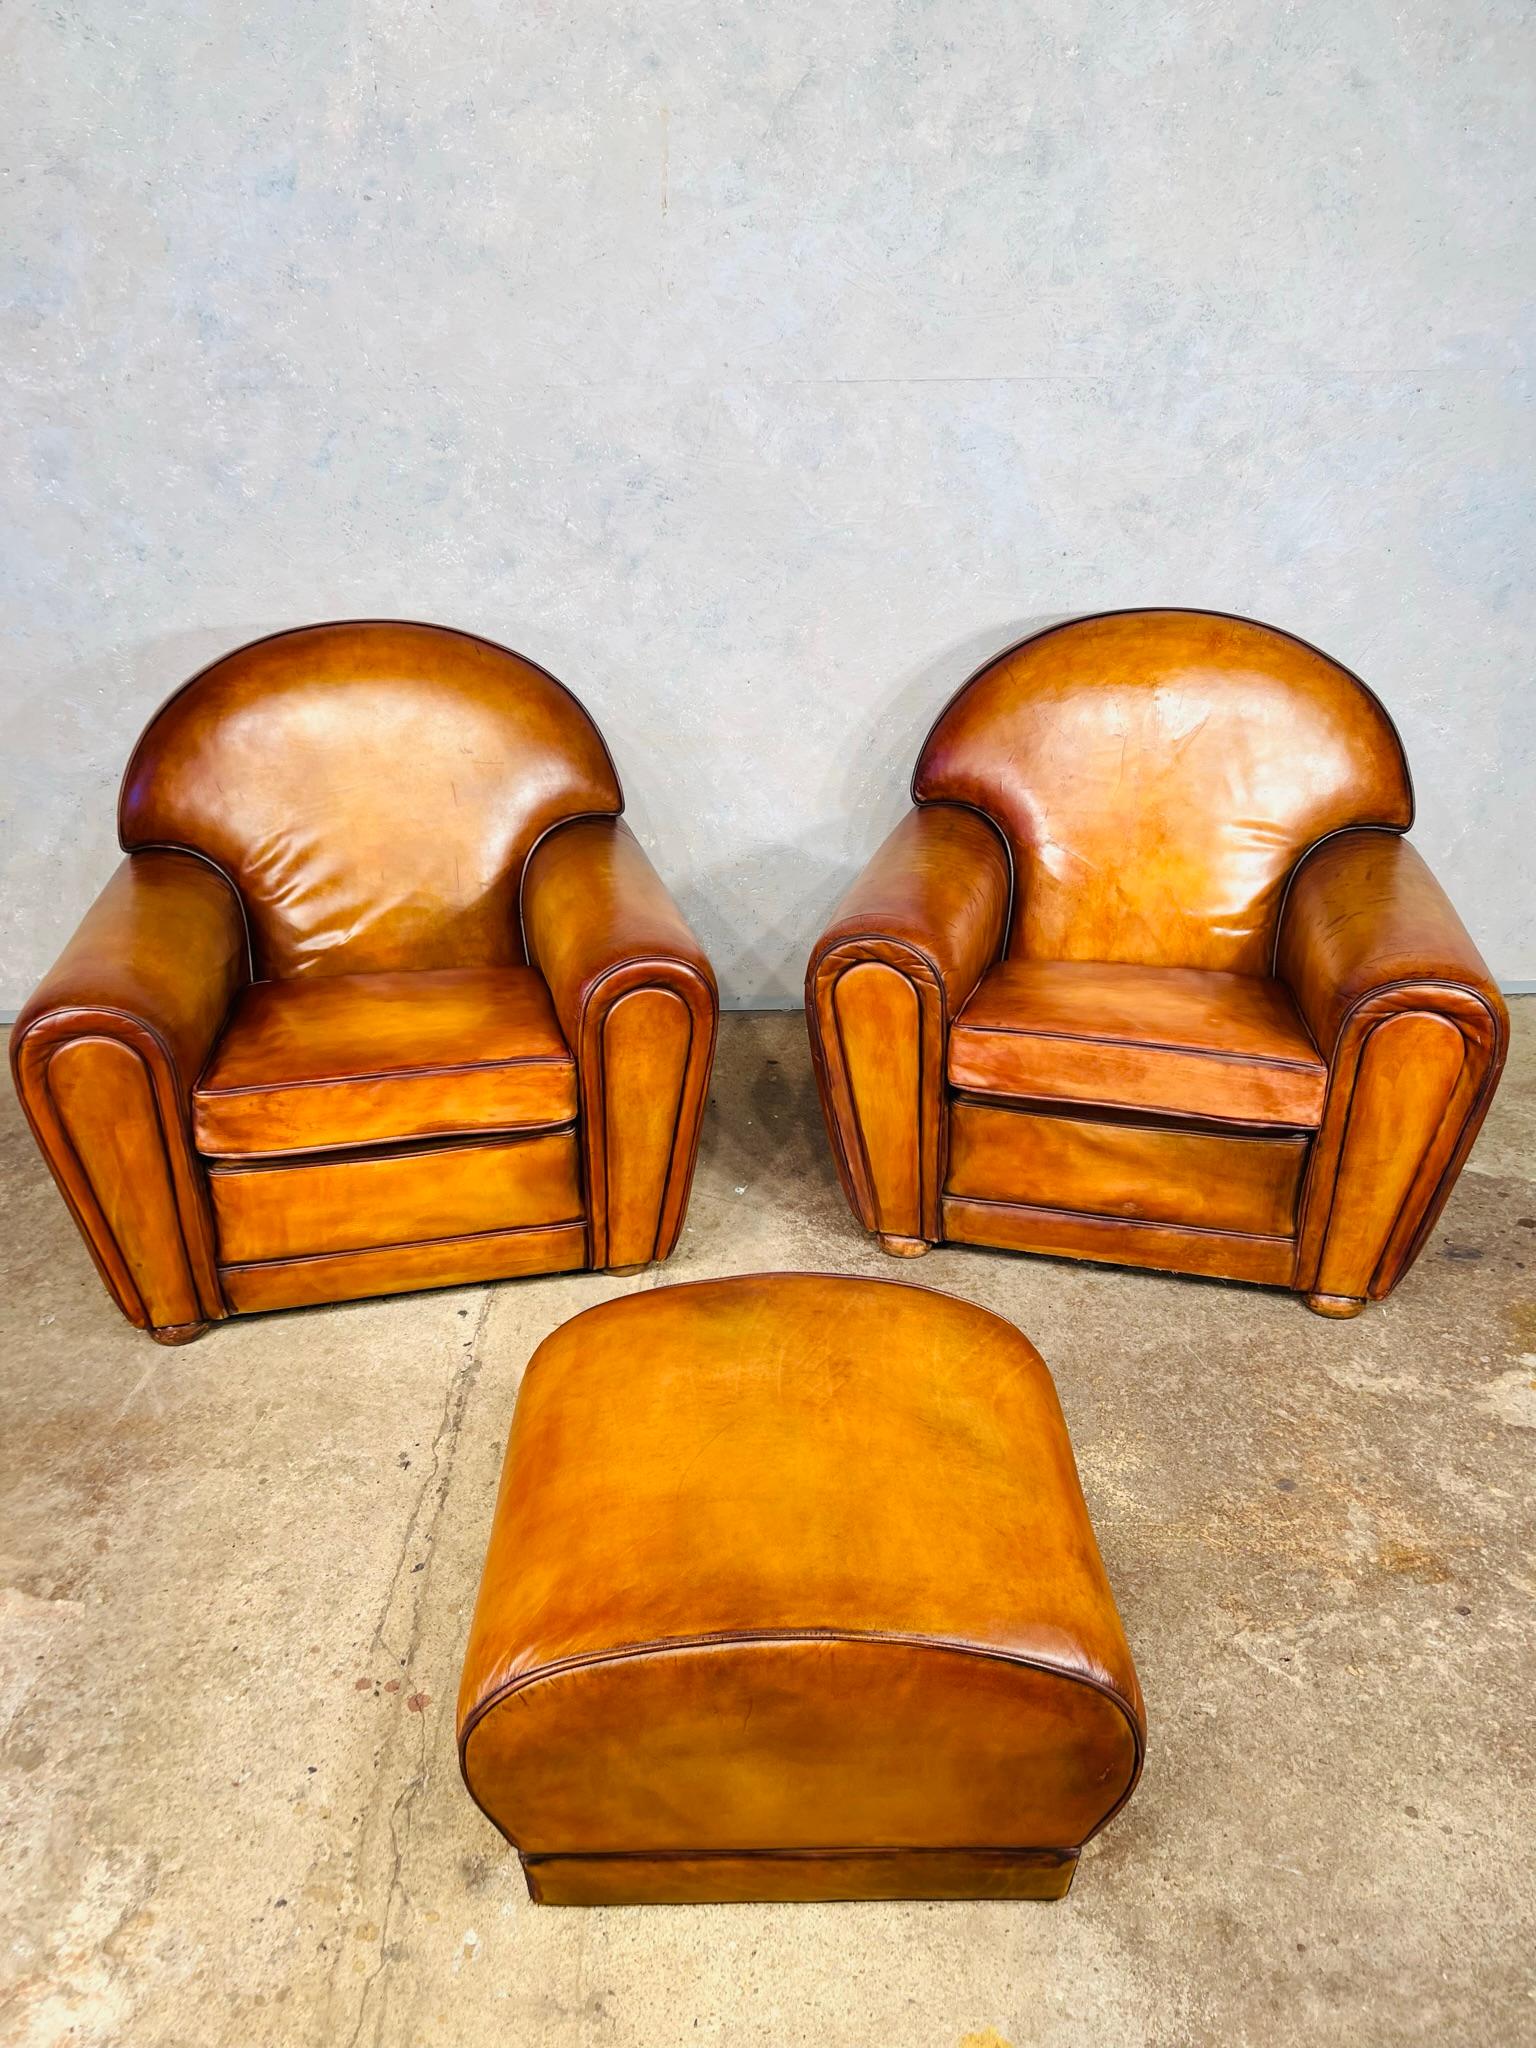 Huge Pair of Art Deco Leather Club Chairs Armchairs and Foot Stool 1940s #668 1